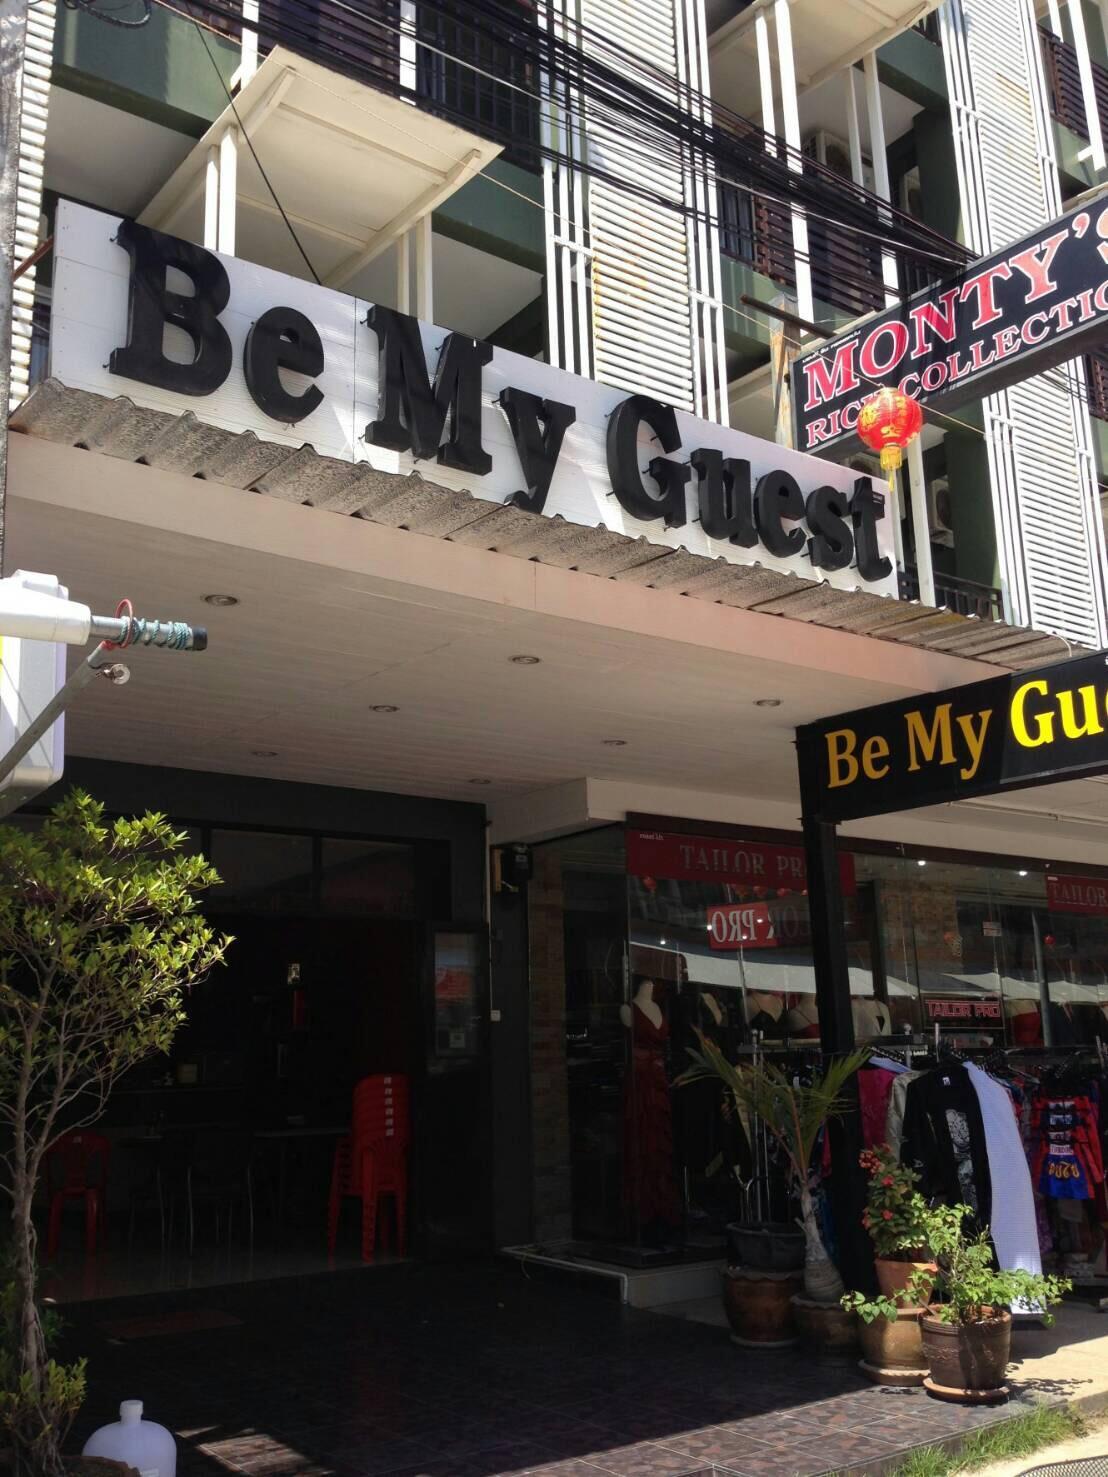 Be My Guest Boutique Hotel